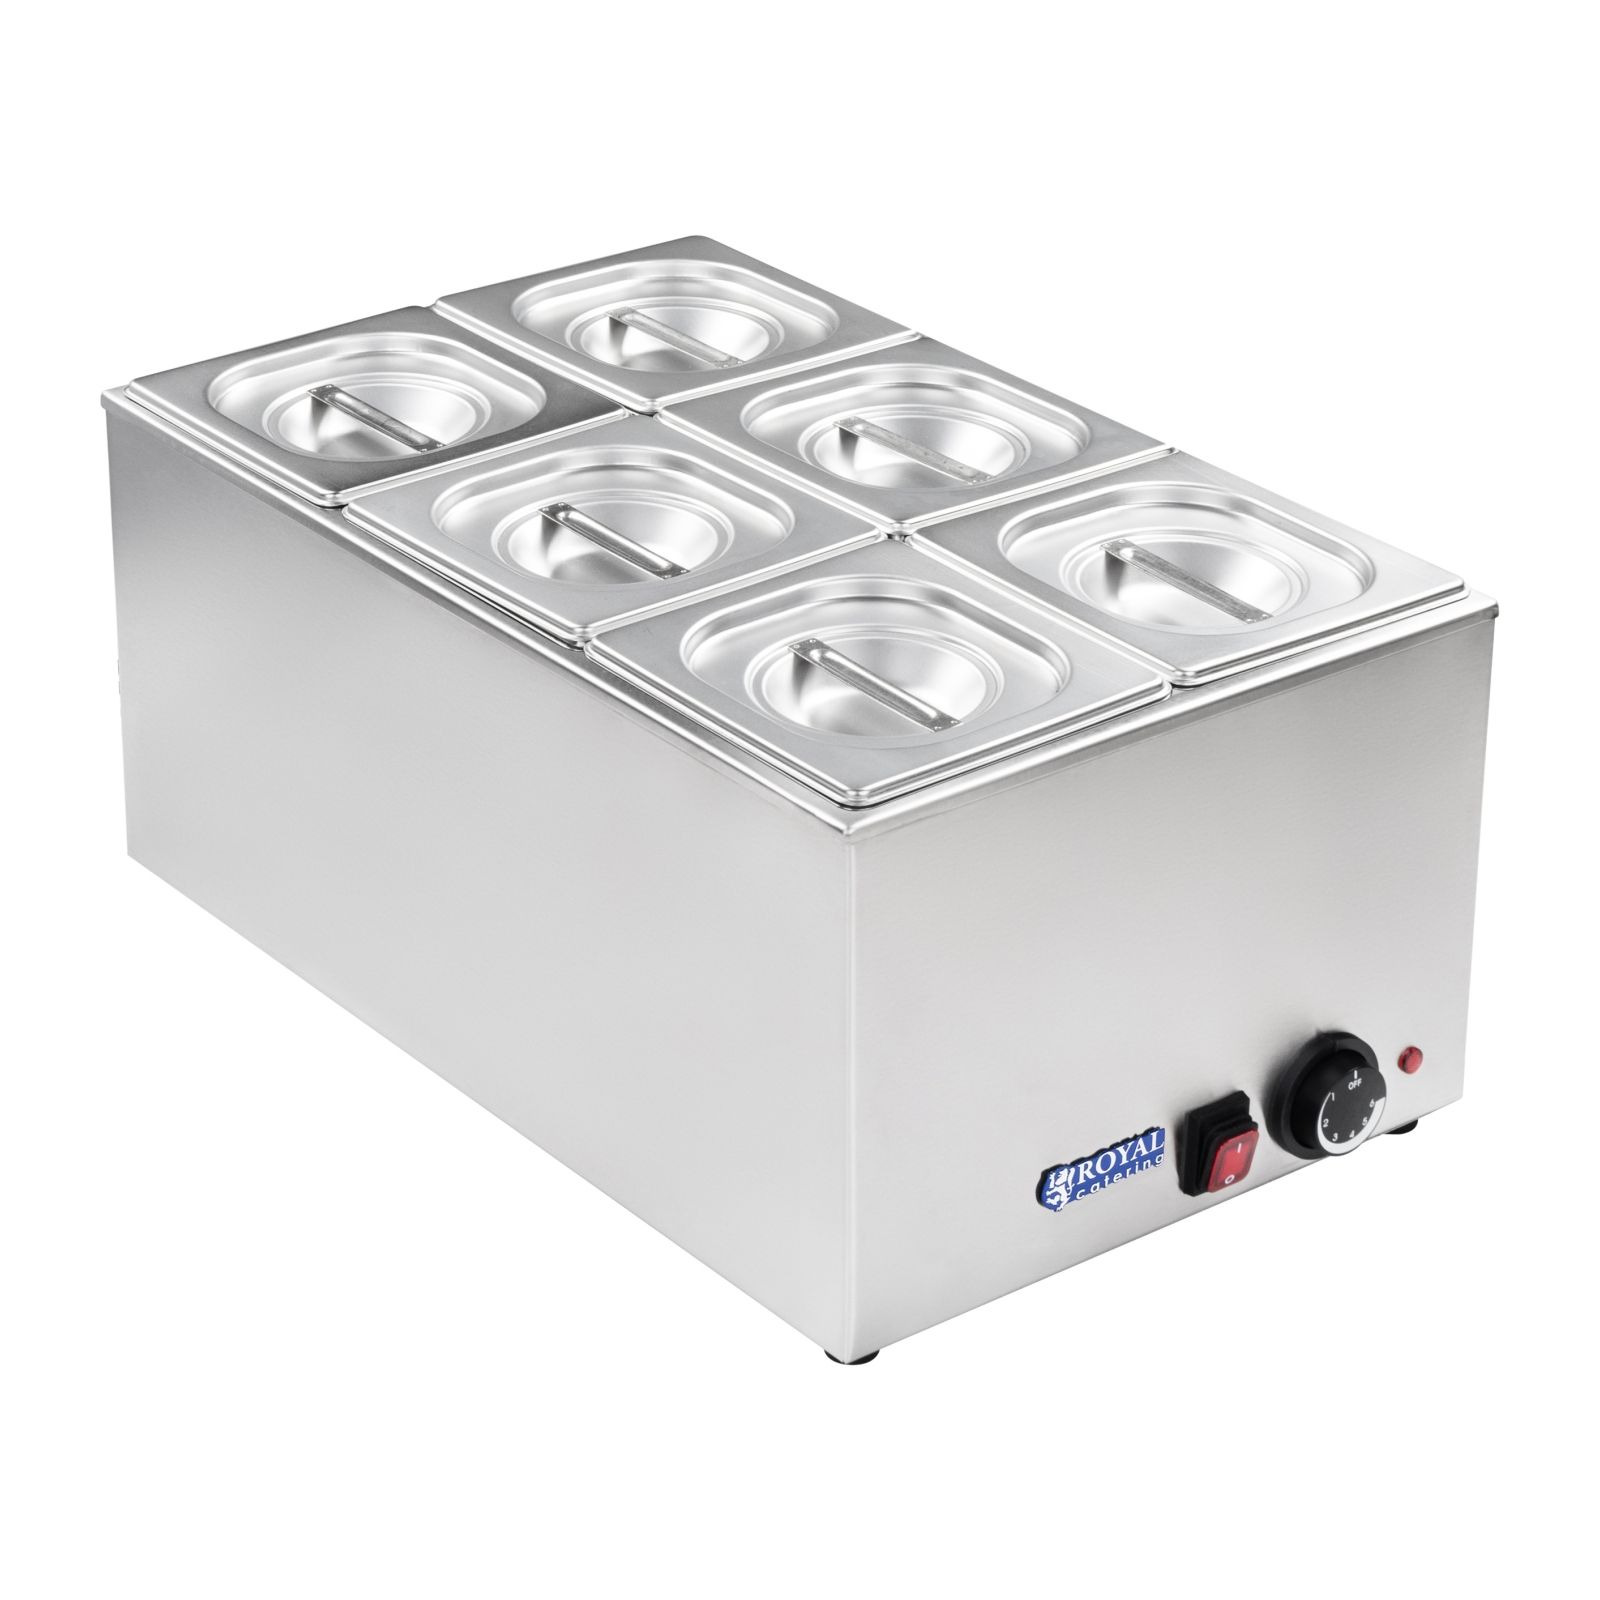 Royal Catering Bain-marie - GN container - 1/6 10010193